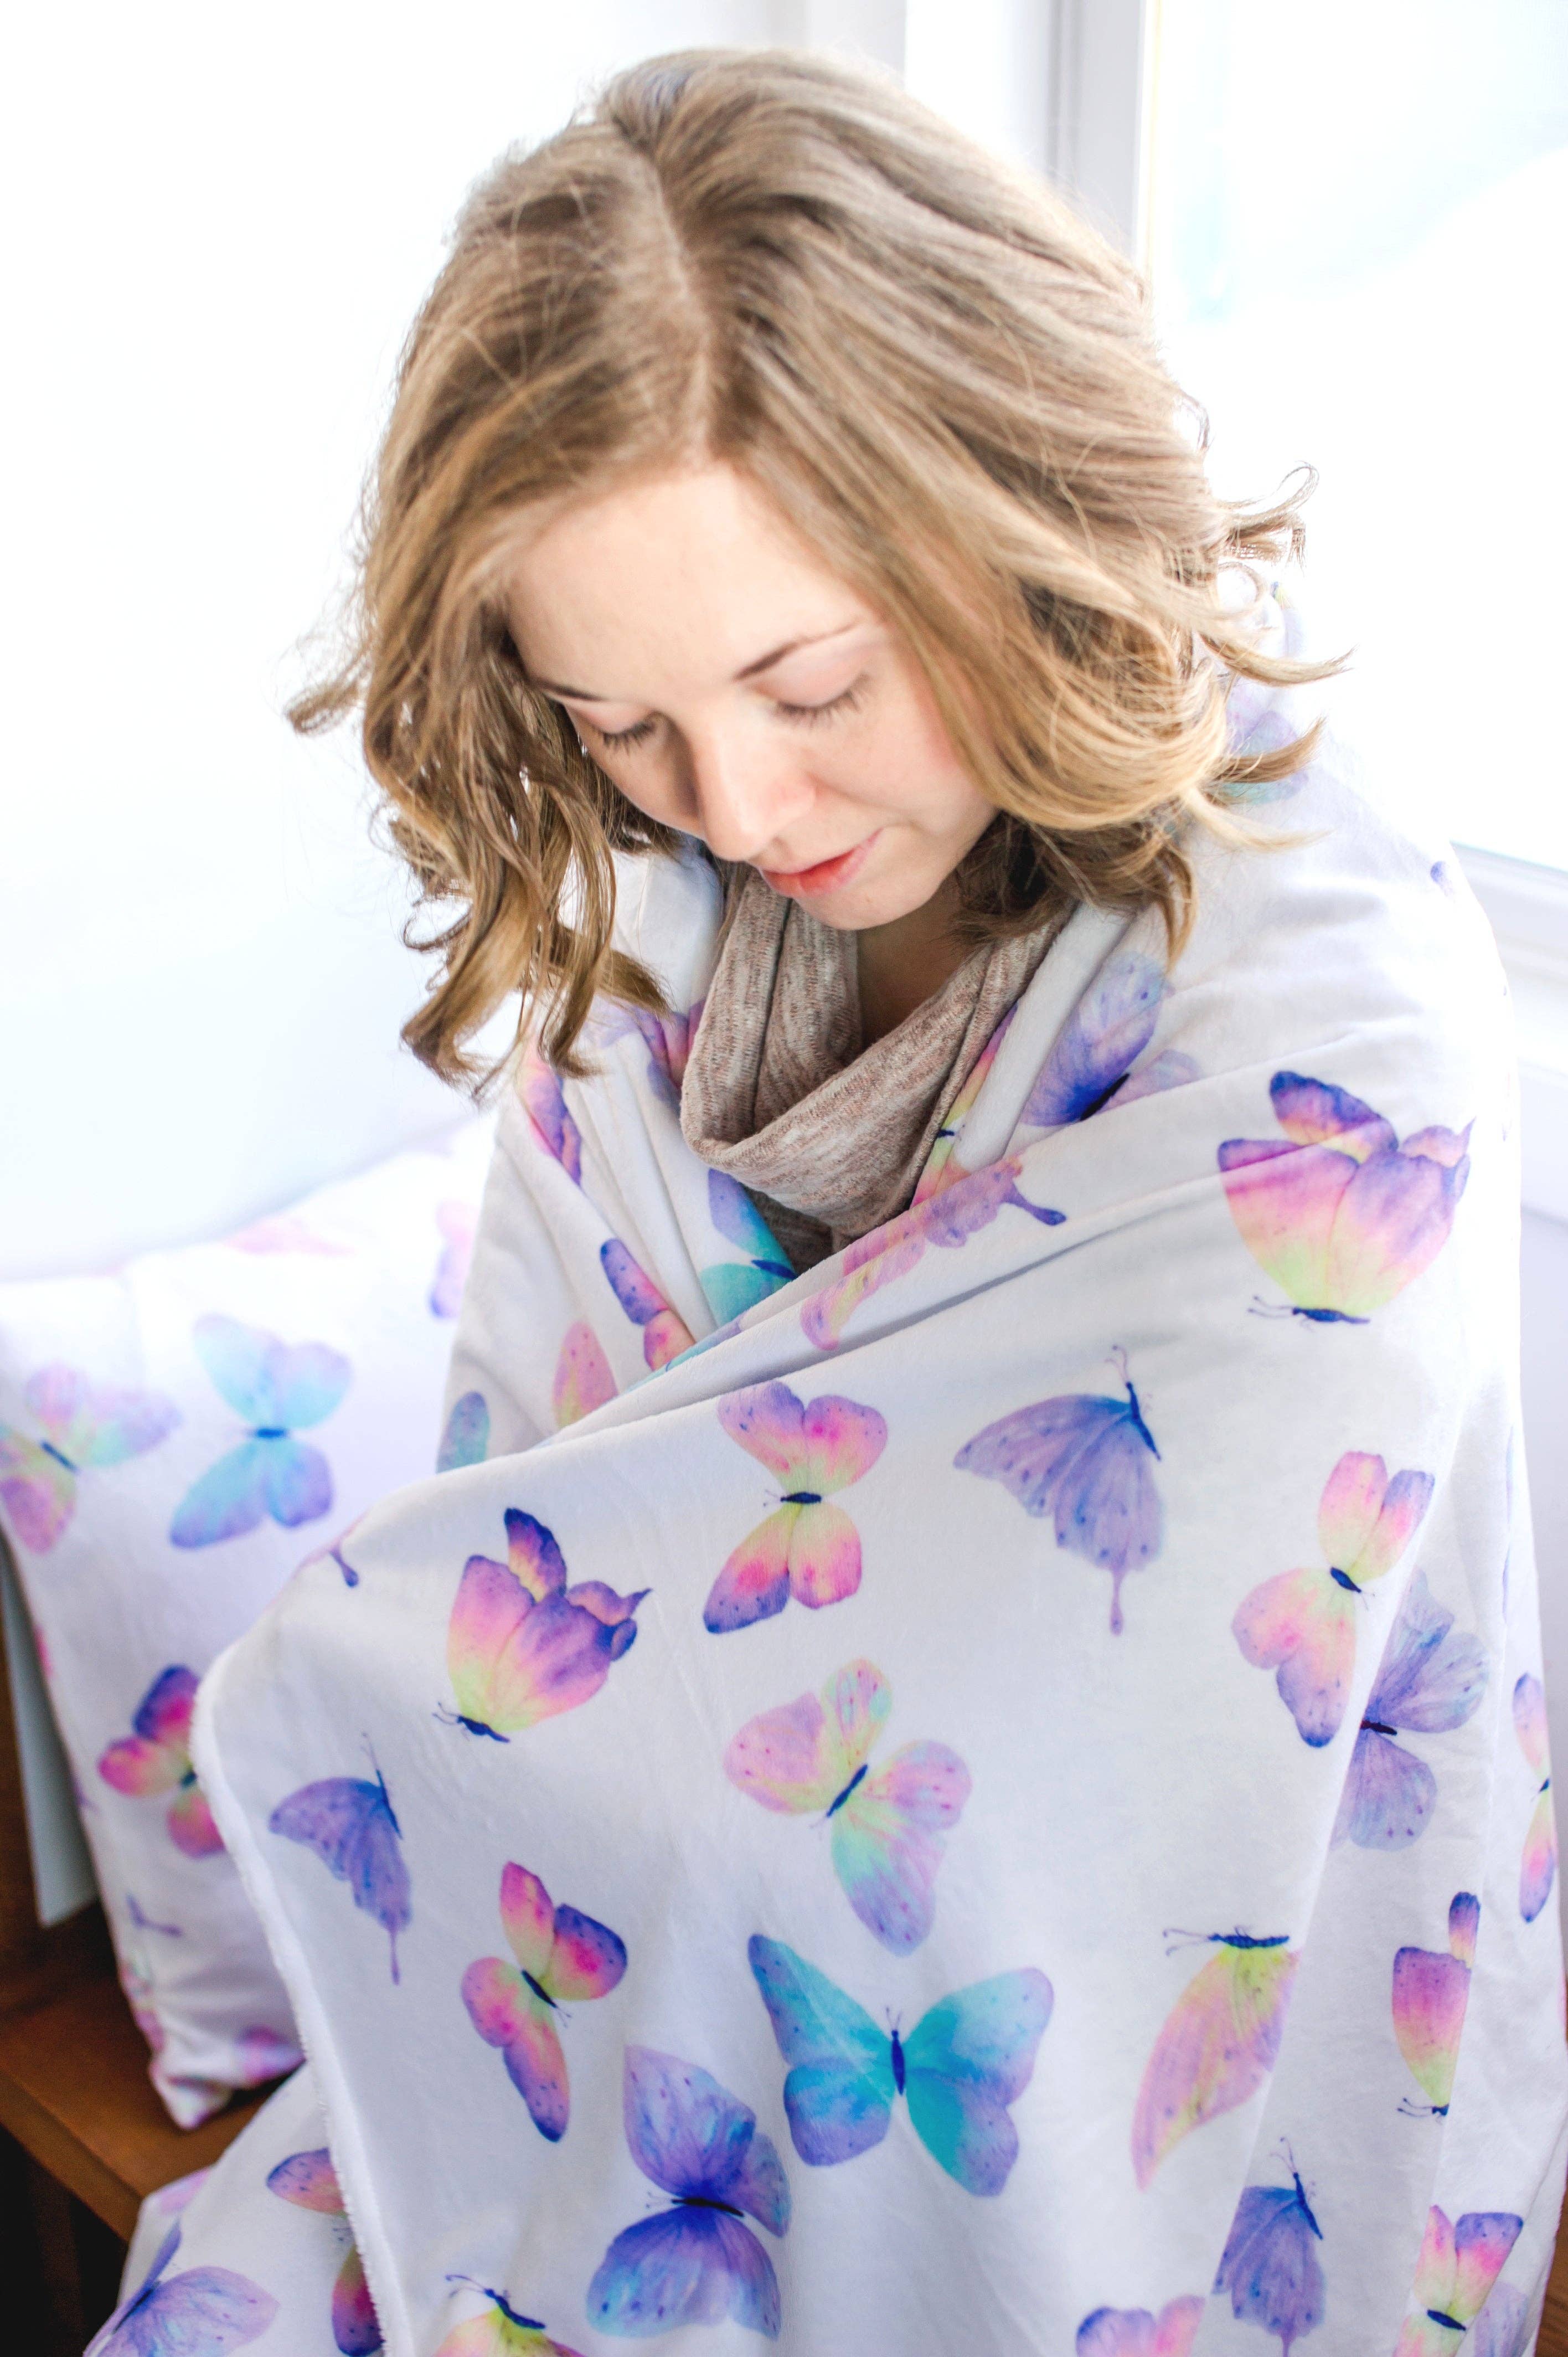 Adult Minky Throw Blanket - Butterfly